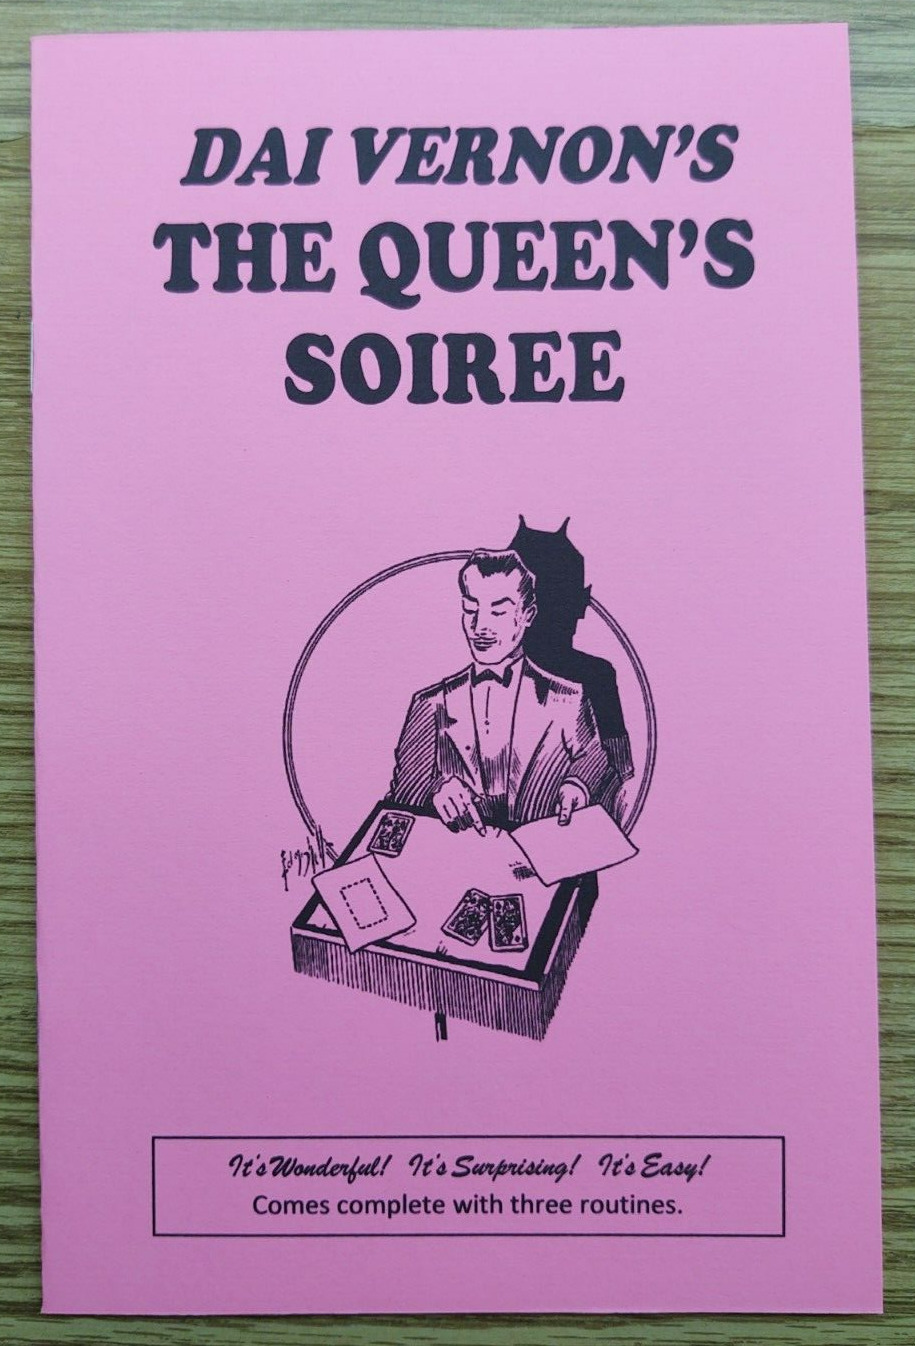 The Queen's Soiree by Dai Vernon